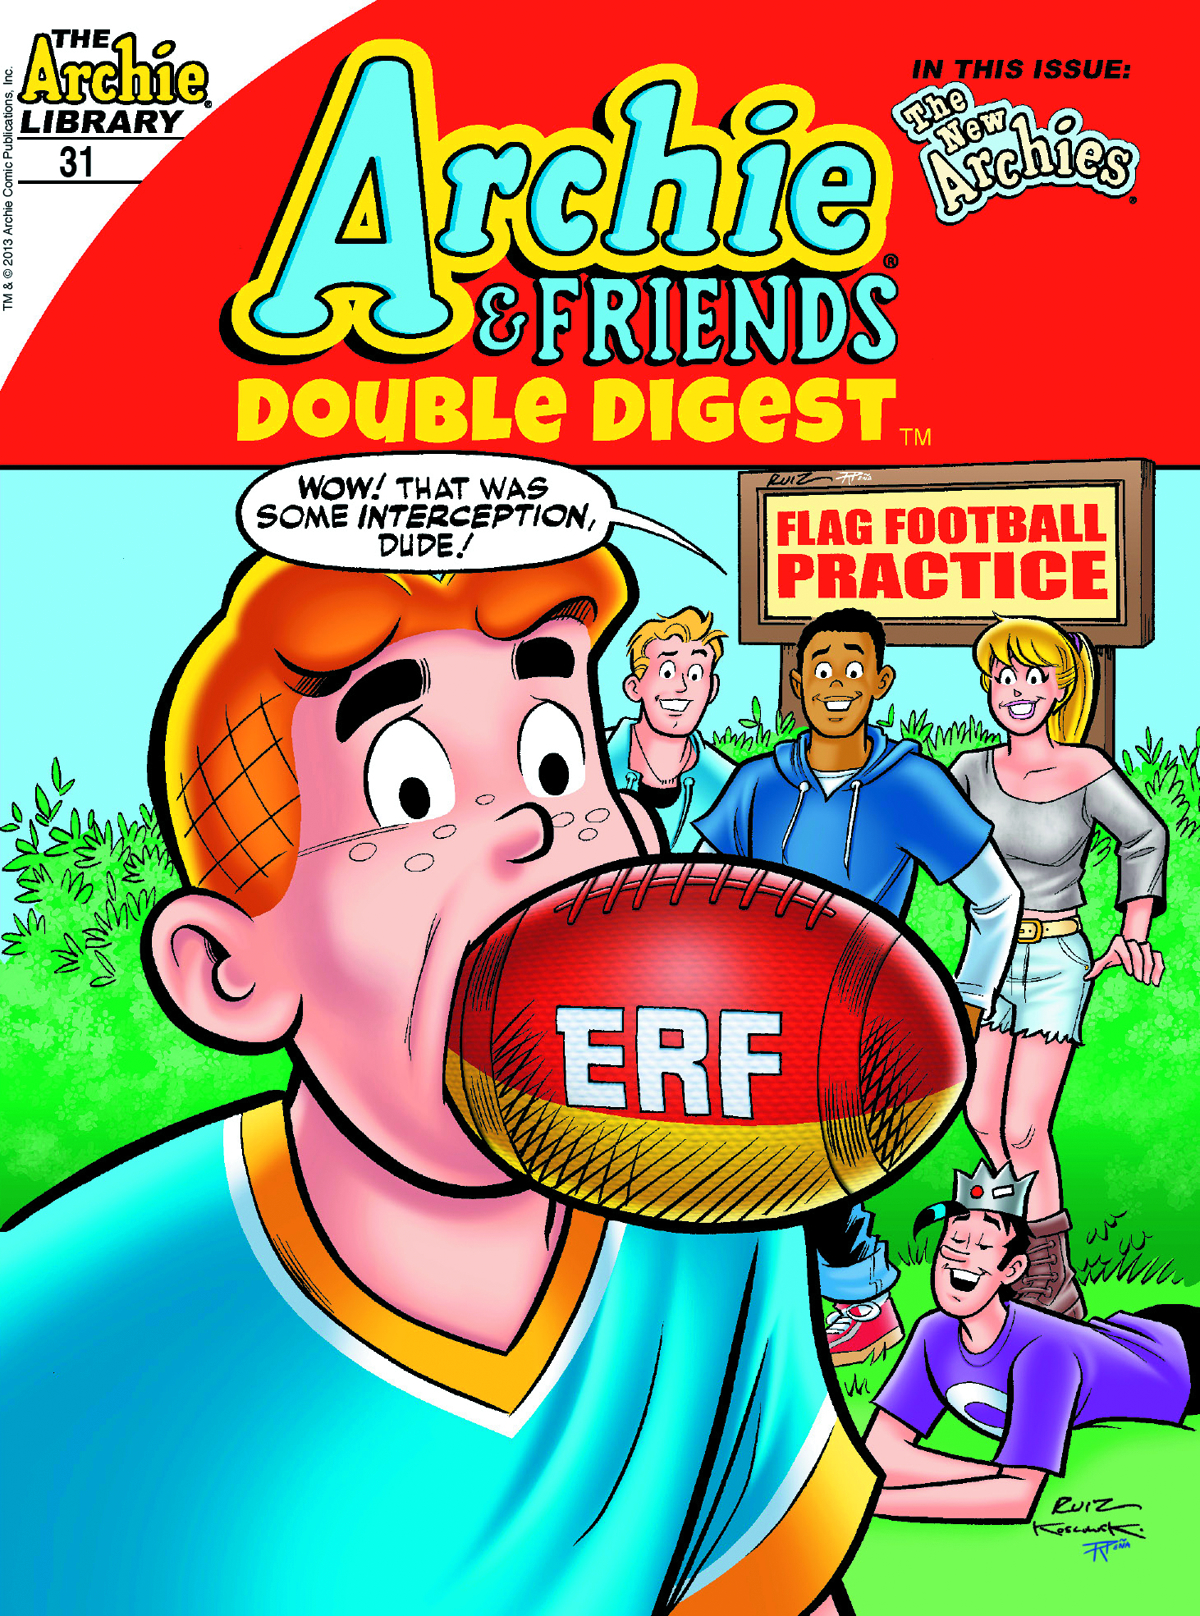 Friends issues. Archie and friends. Френдс Дабл. Дабл френд. Archie & friends Comics Jughead Archi Veronica Mr. Weatherbe.